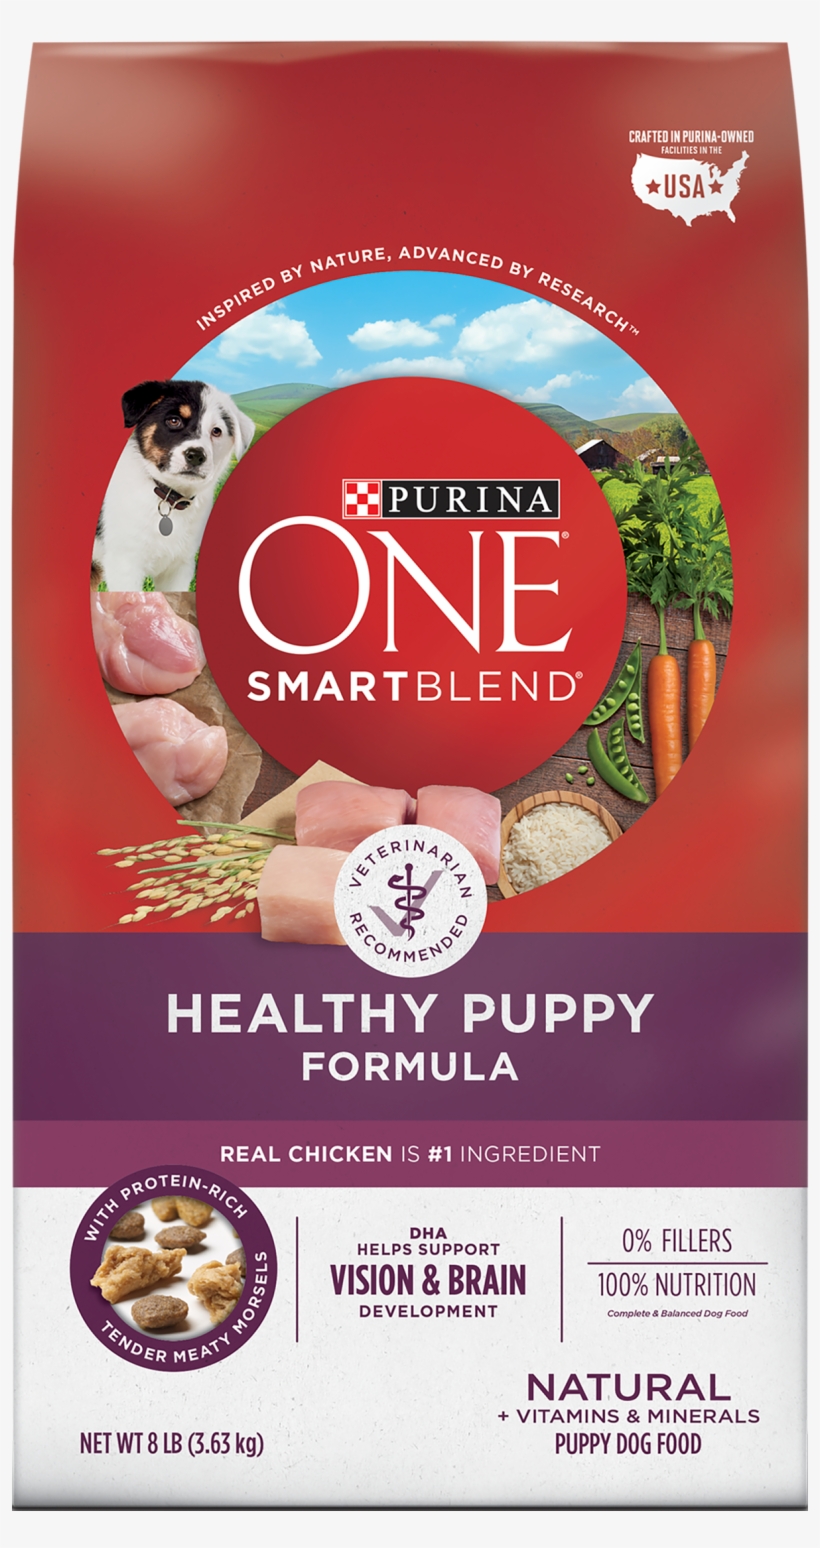 Purina One Puppy Food, transparent png #1347856